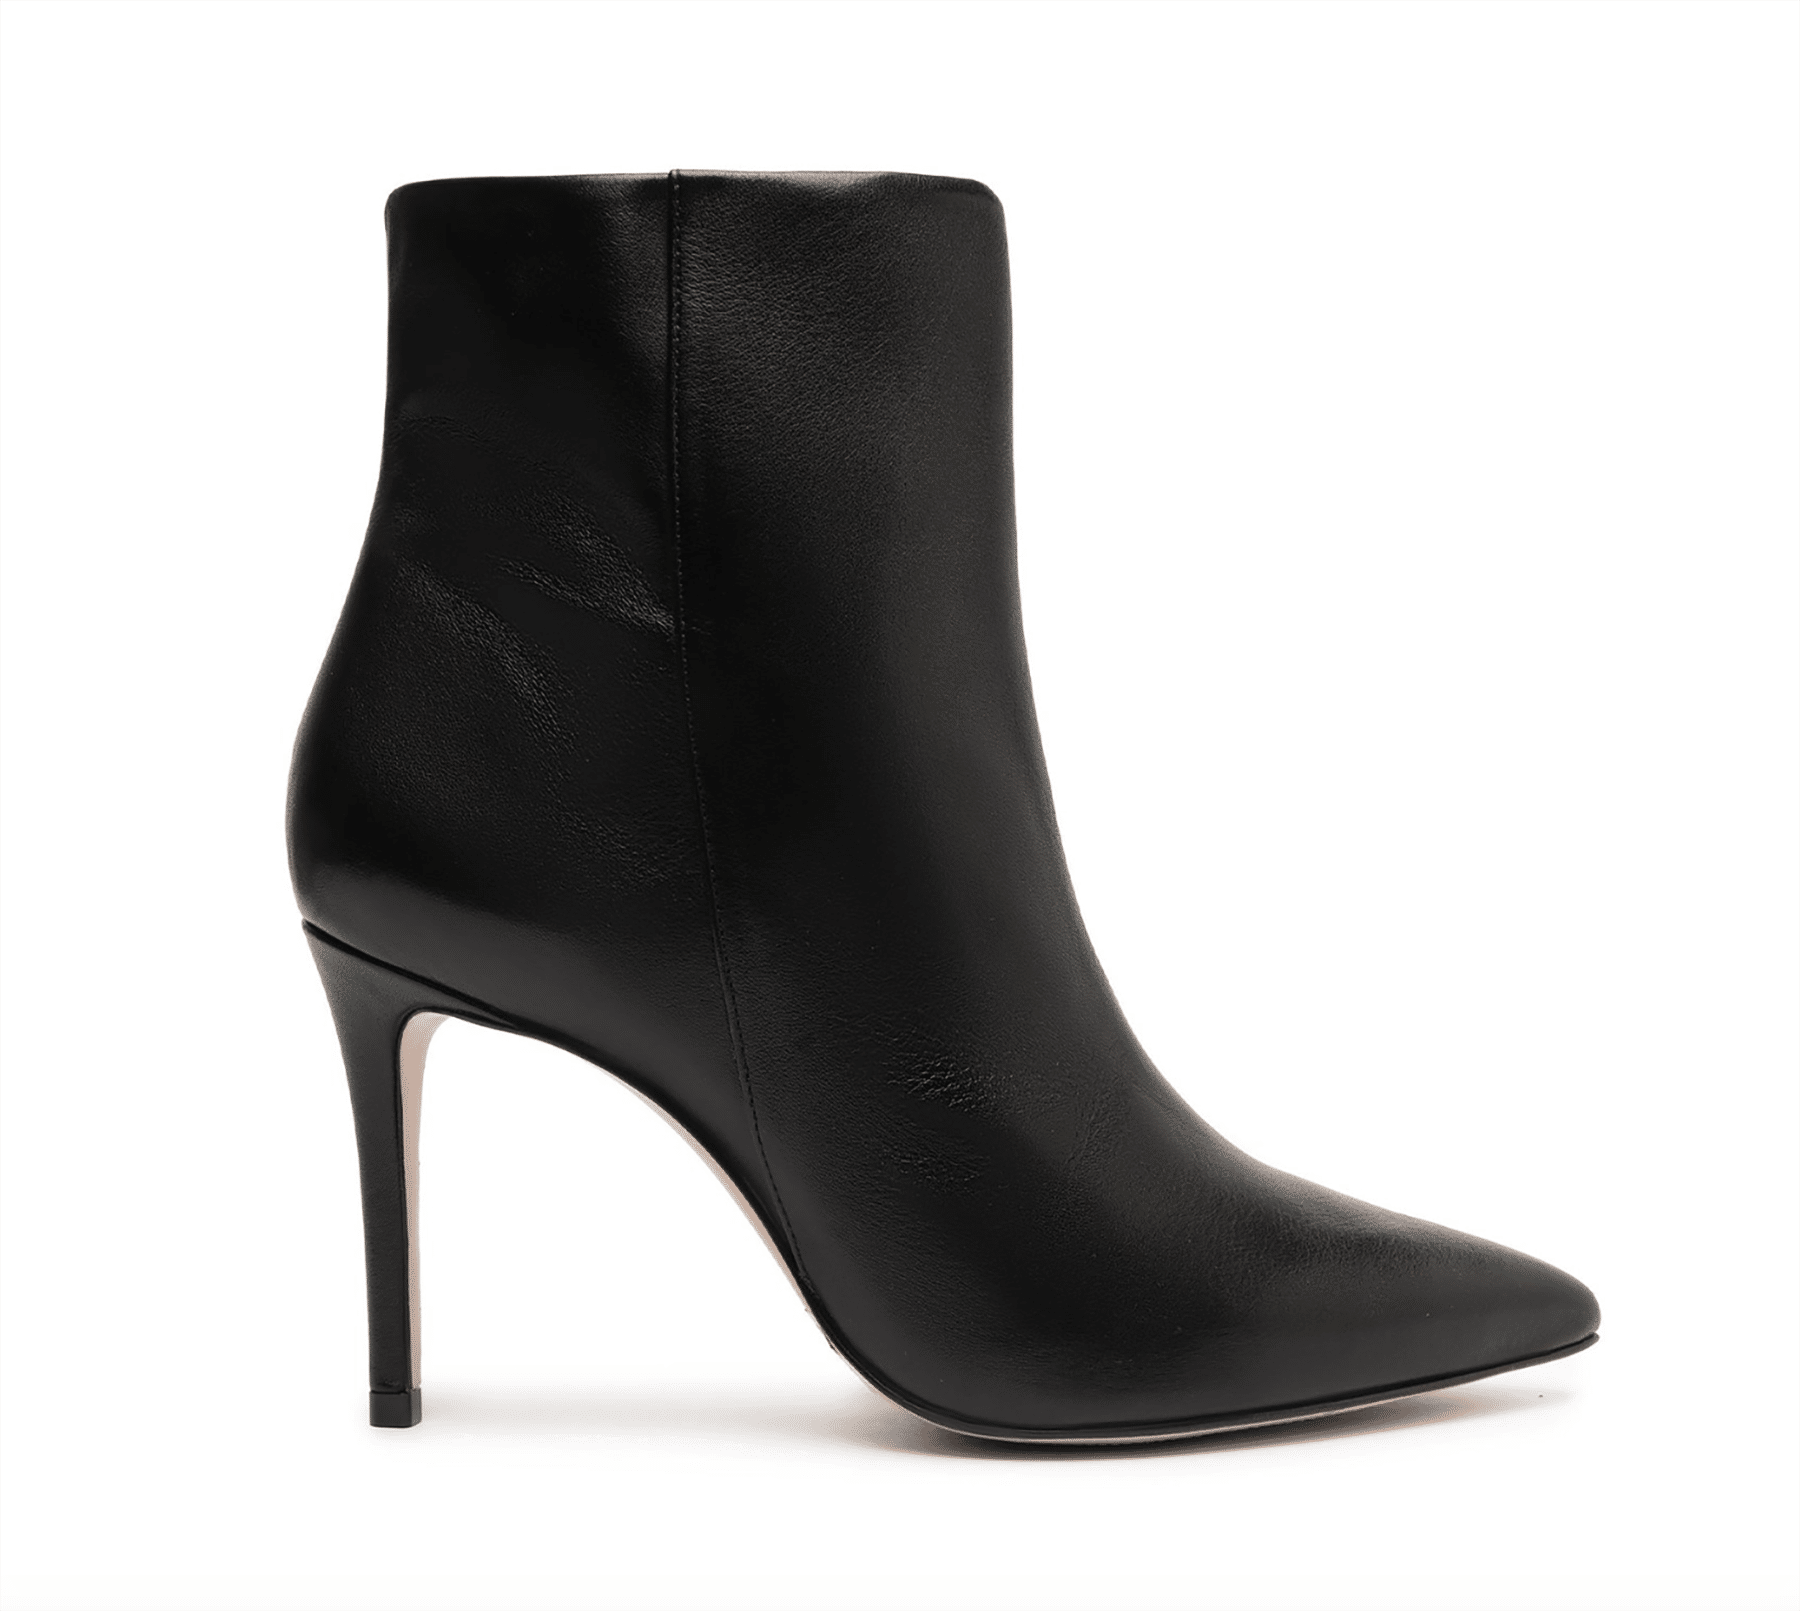 Top 8 Bottega Veneta Boot Dupes | Get The Iconic Look For Less